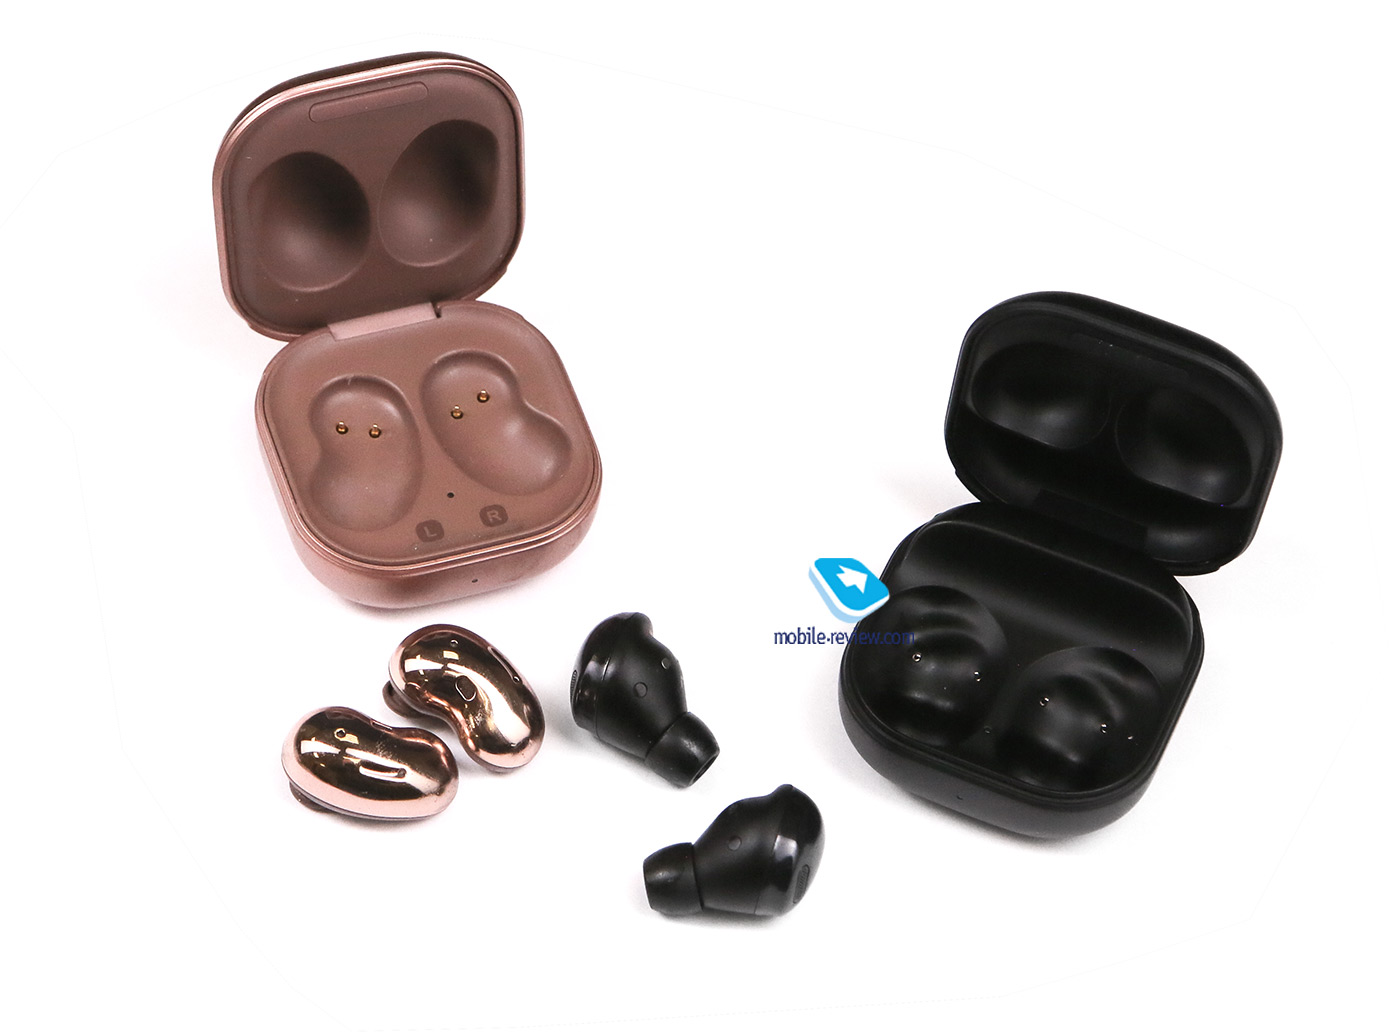 Samsung Galaxy Buds Pro (SM-R190) Noise Canceling TWS Headphones Review